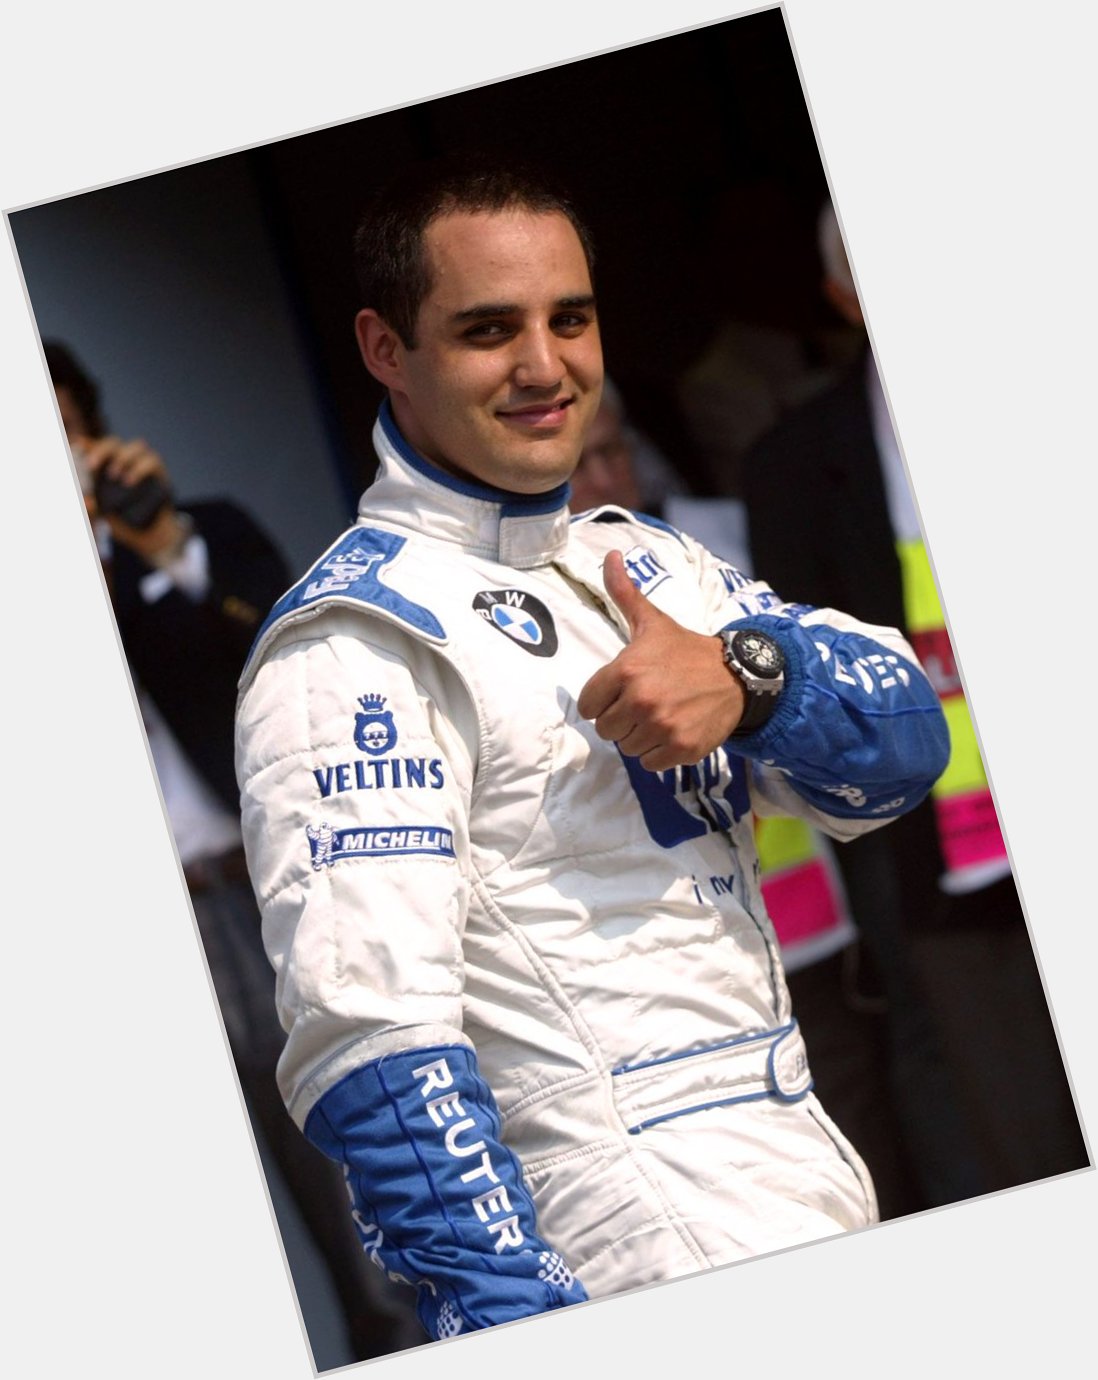 A very Happy Birthday to the one and only Juan Pablo Montoya!

A phenomenal driver  